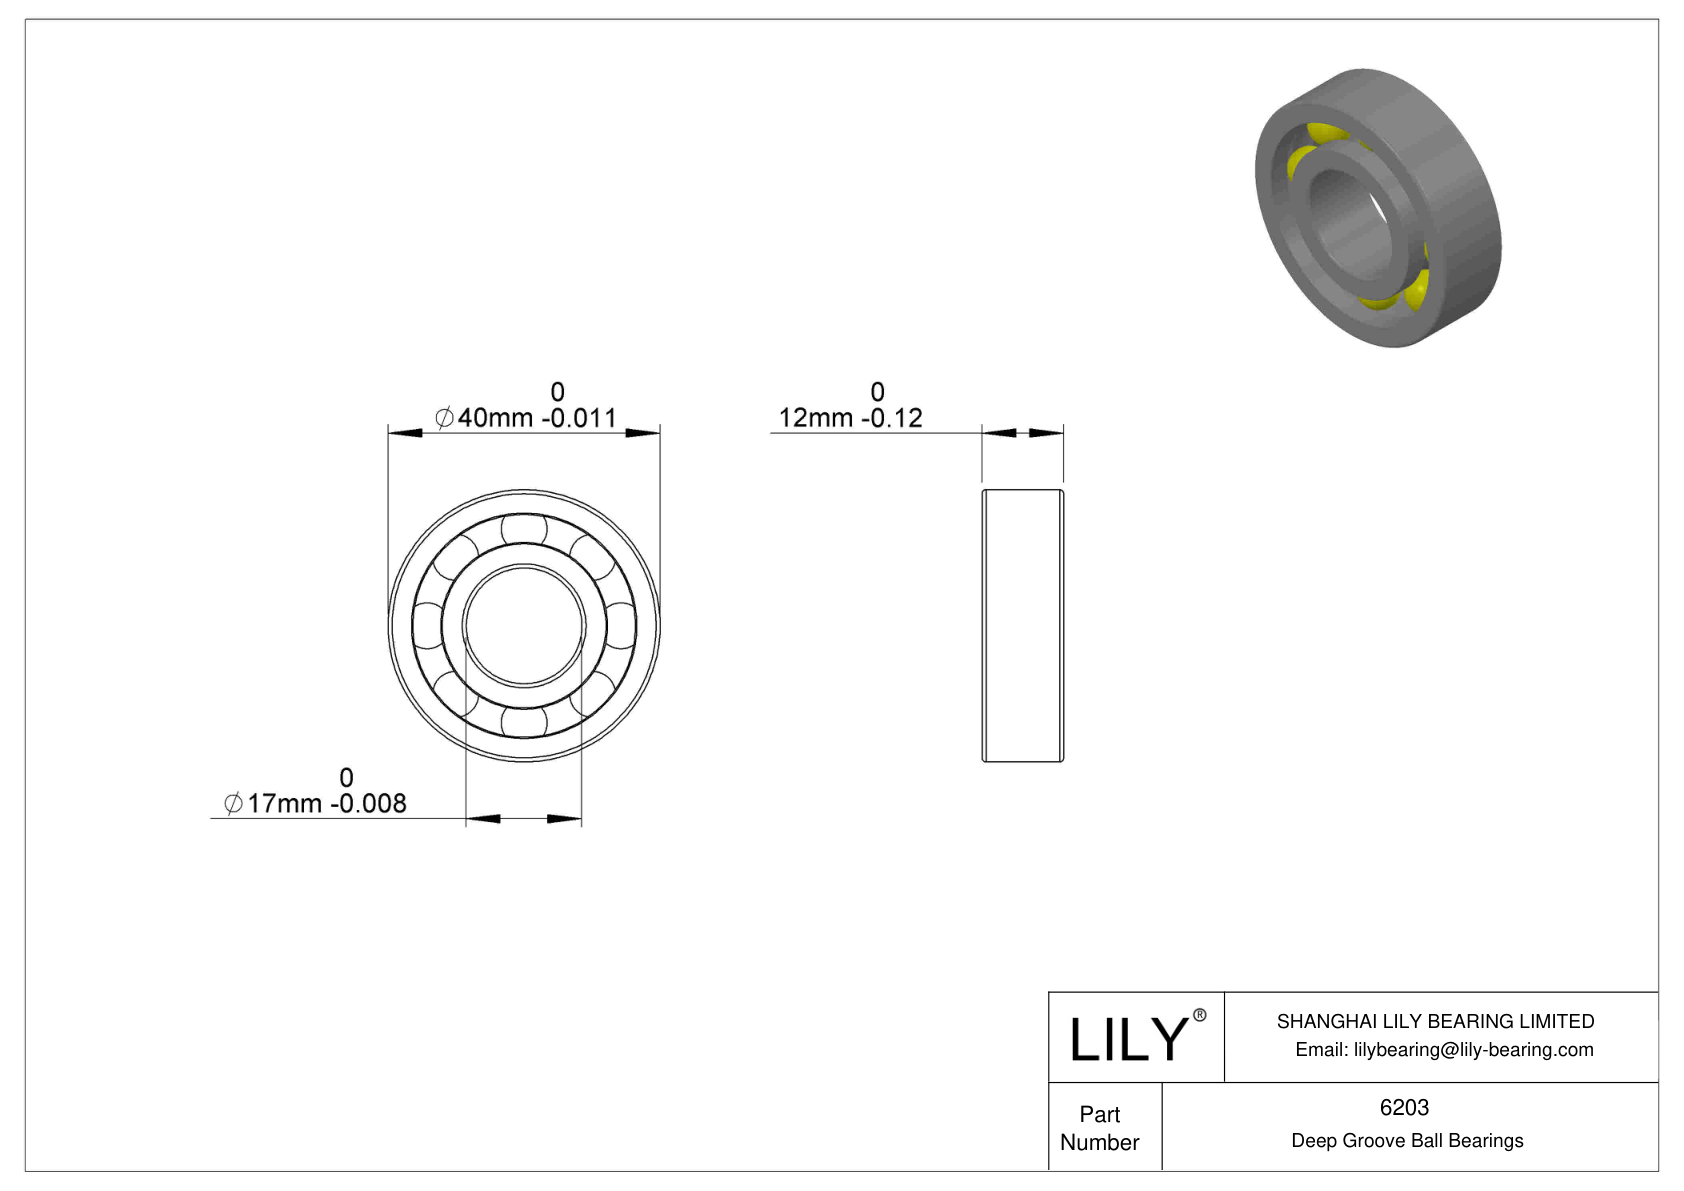 LILY-PU620350-18C2L12M10 Polyurethane Coated Bearing With Screw cad drawing